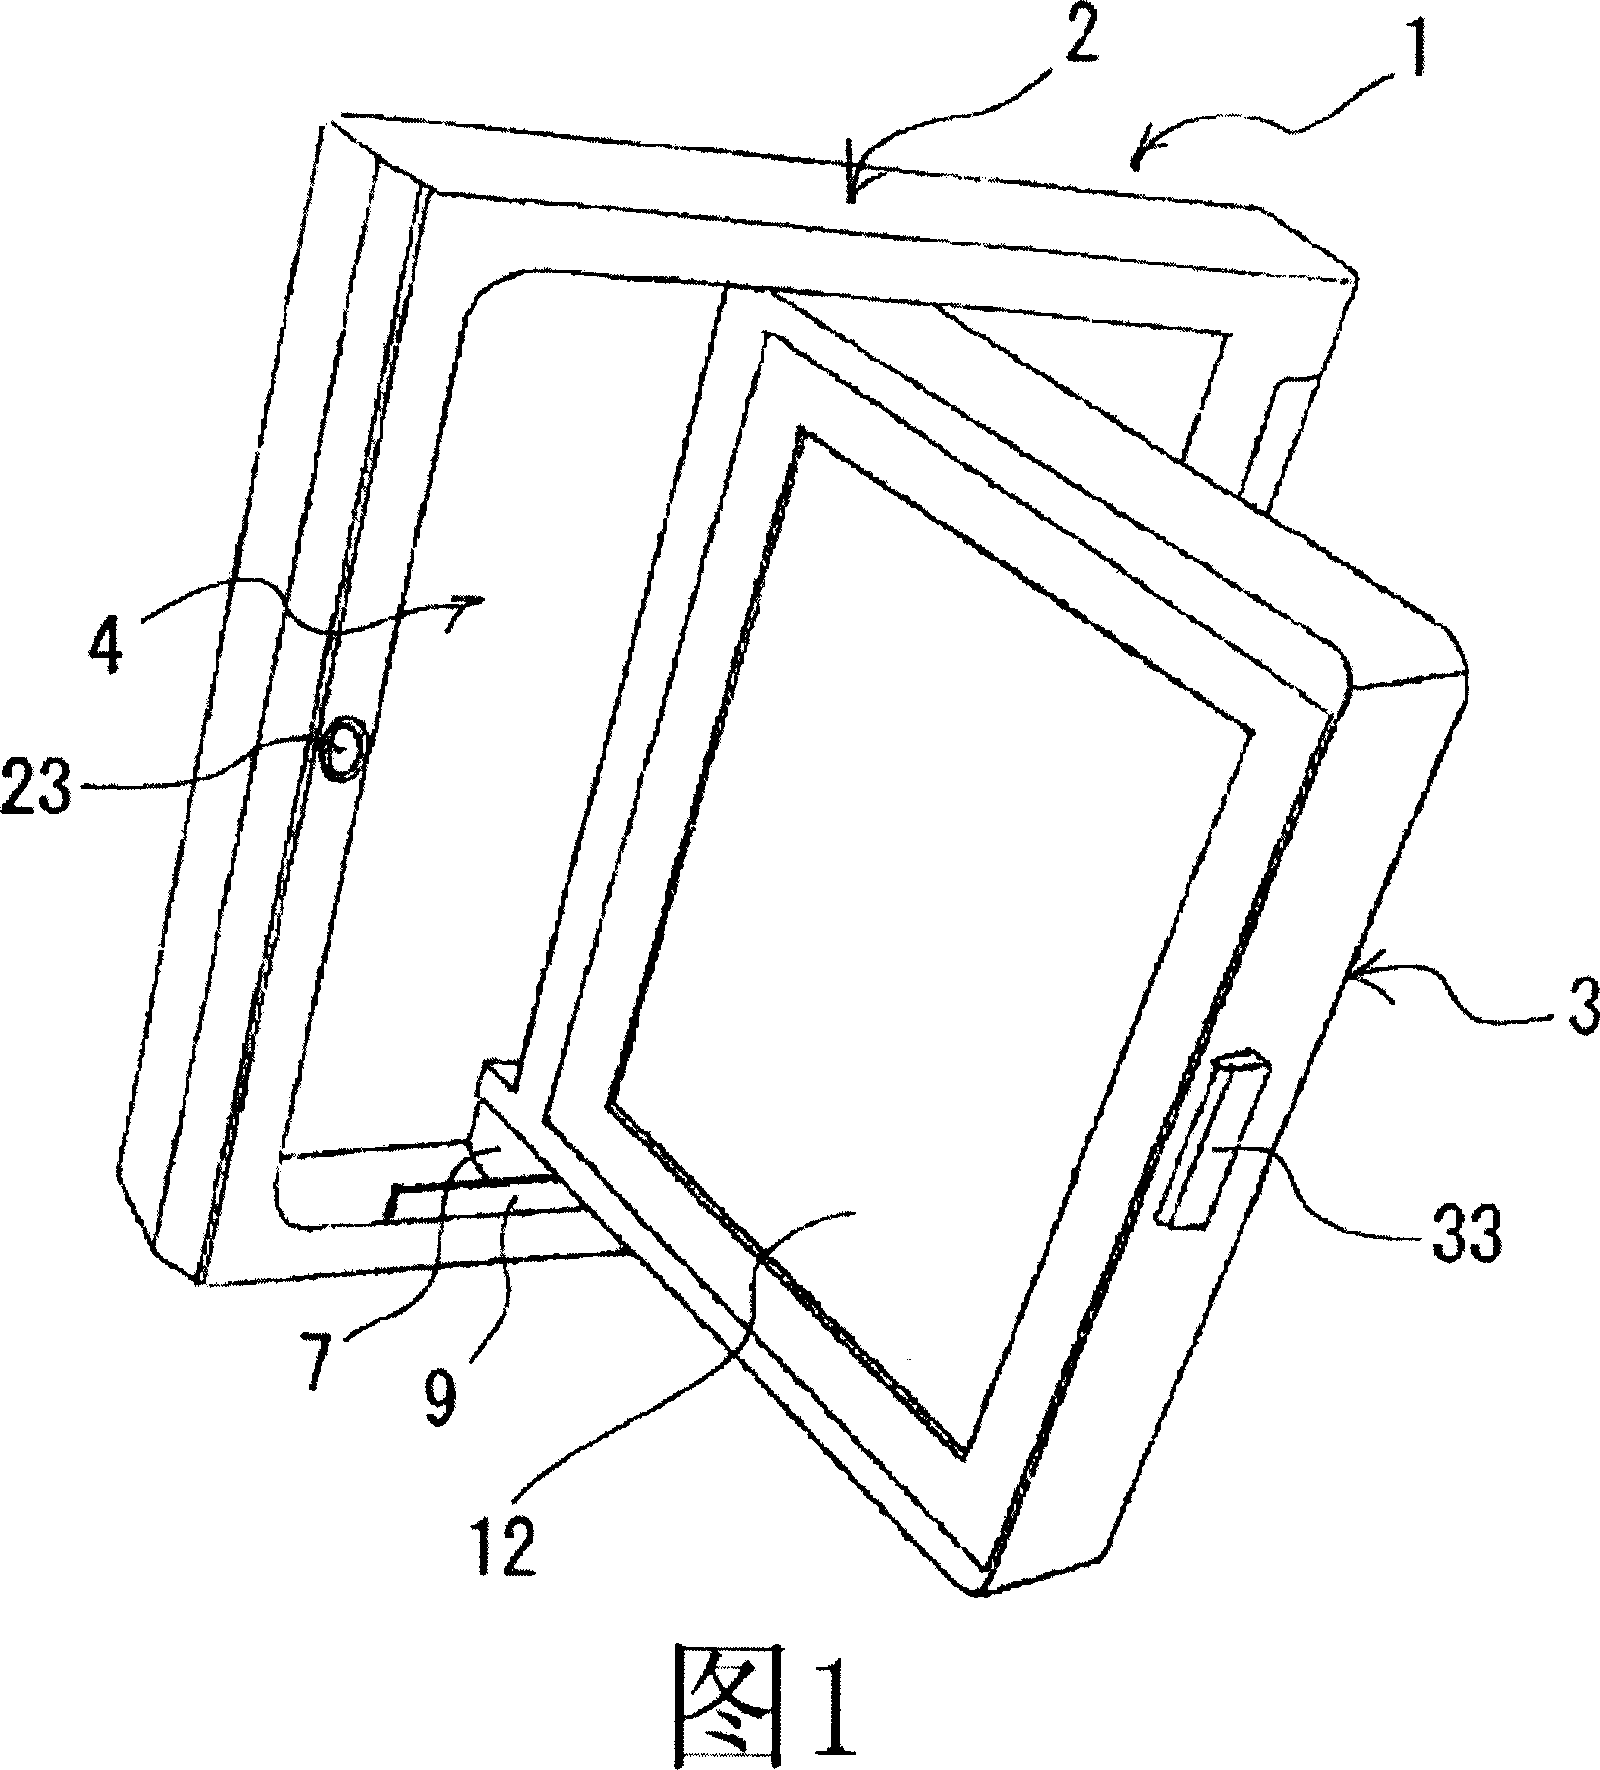 Vehicle boarded monitor storage device